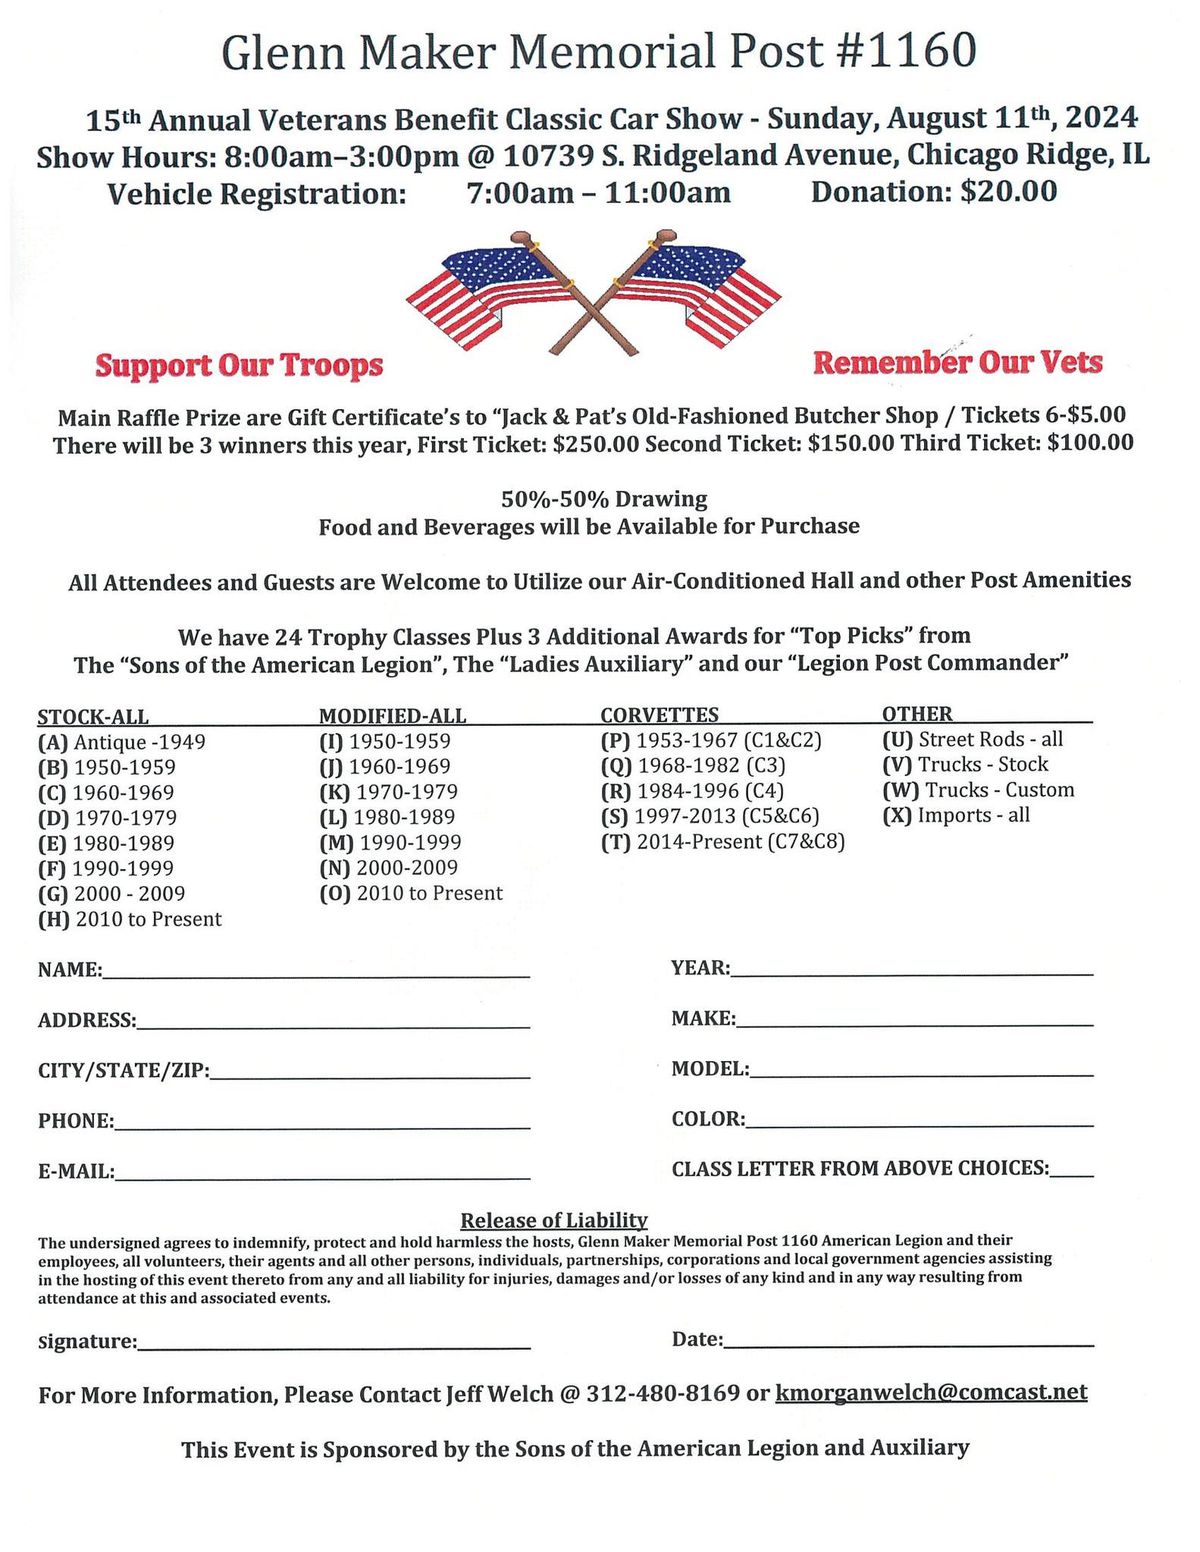 15th Annual Veterans Benefit Classic Car Show - Sunday August 11, 2024